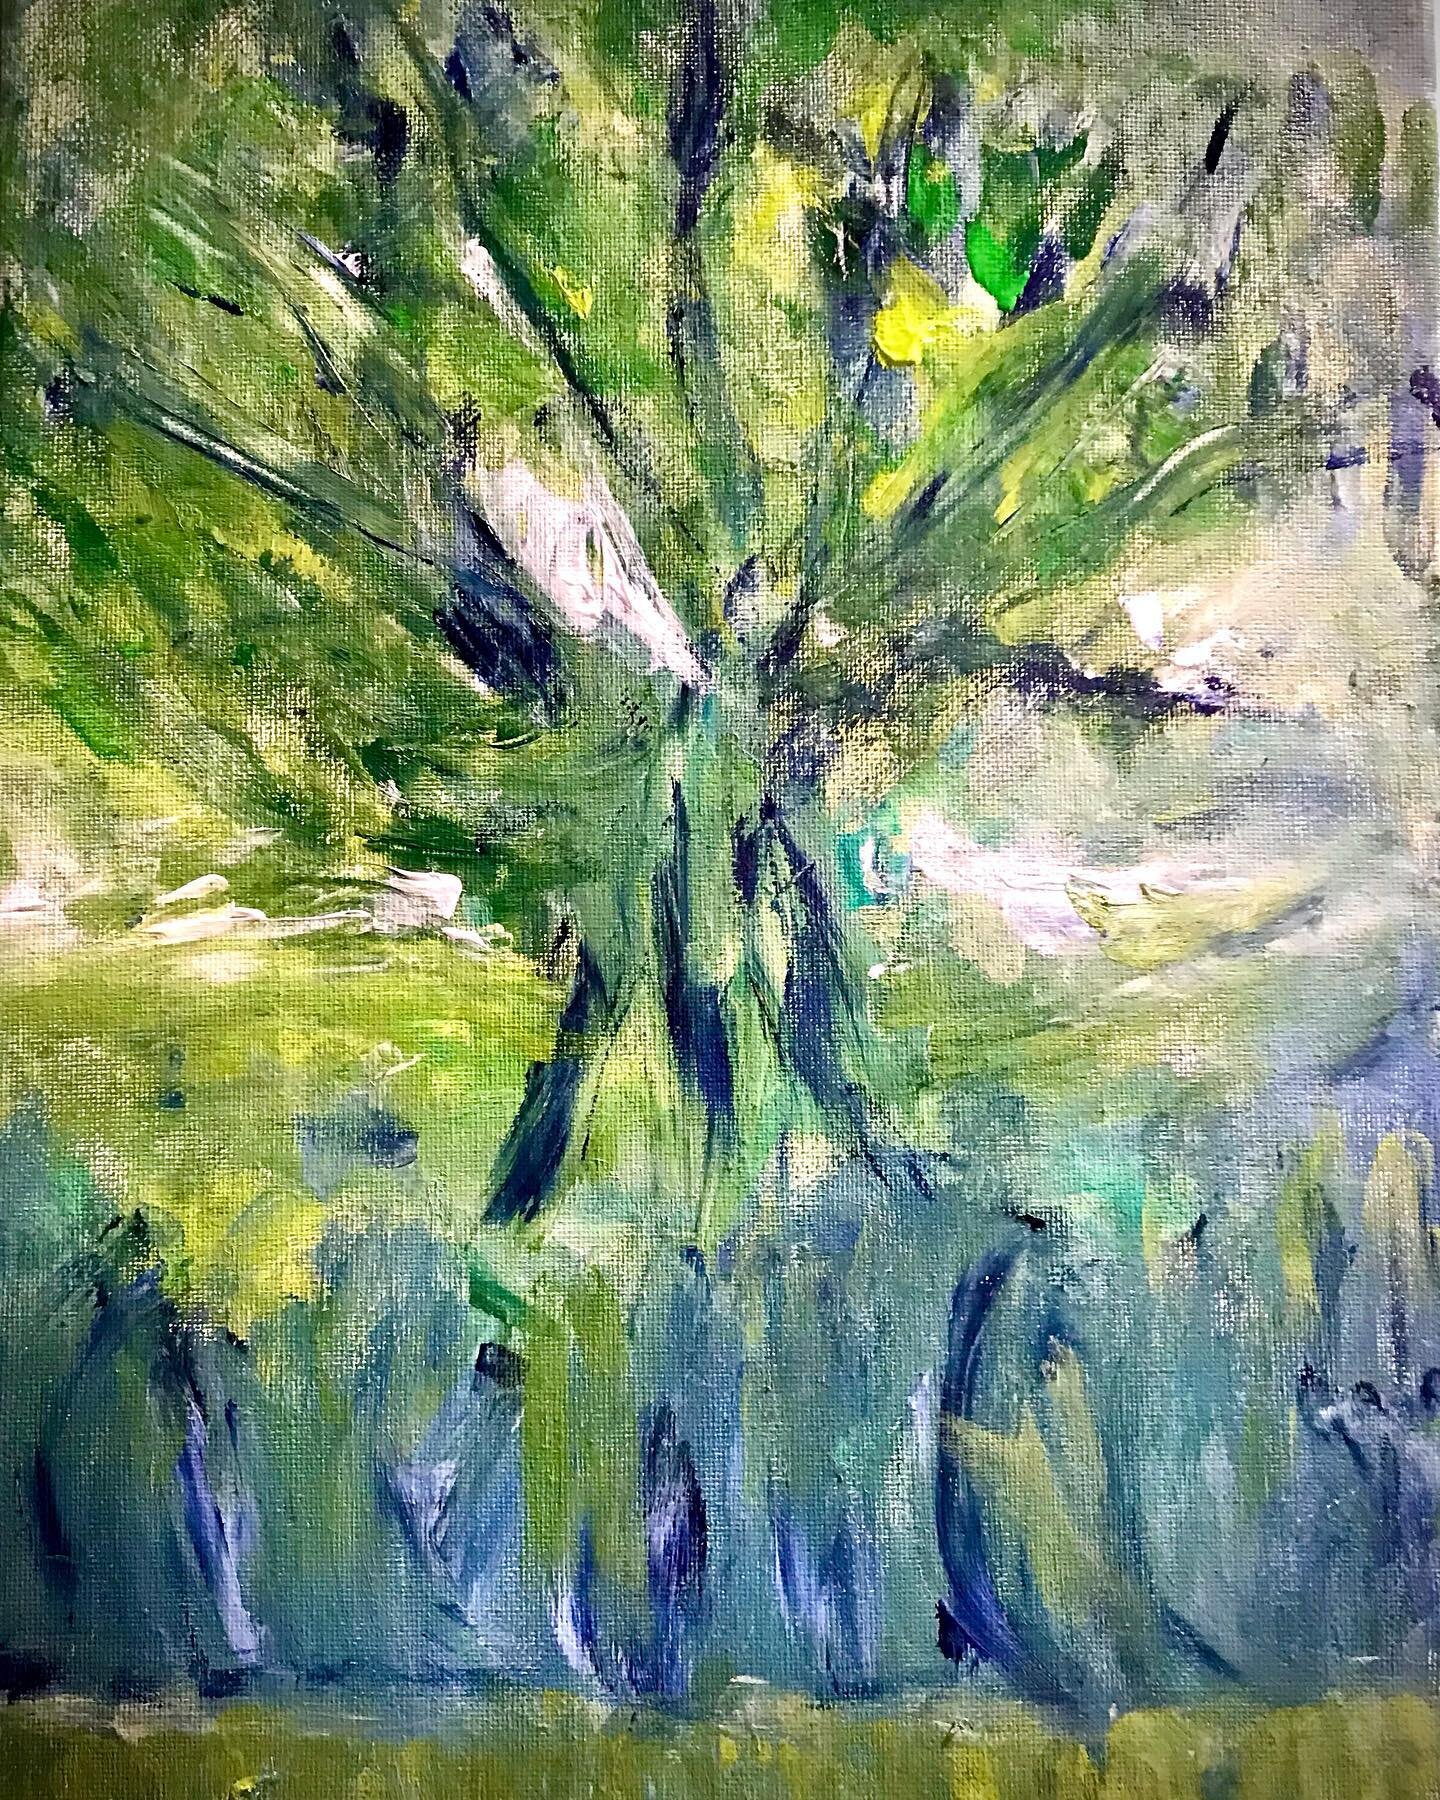 &bdquo;A walk in May&ldquo;
Acrylic on canvas
40 x 30 cm
&bdquo;To walk in nature is to witnes in thousand miracles&ldquo;
.
#art#artwork#nature#may#maywalk#magic#magical#acrylicpaintings#painter#artistic_share#ilovepainting#mood#creativity#creativit